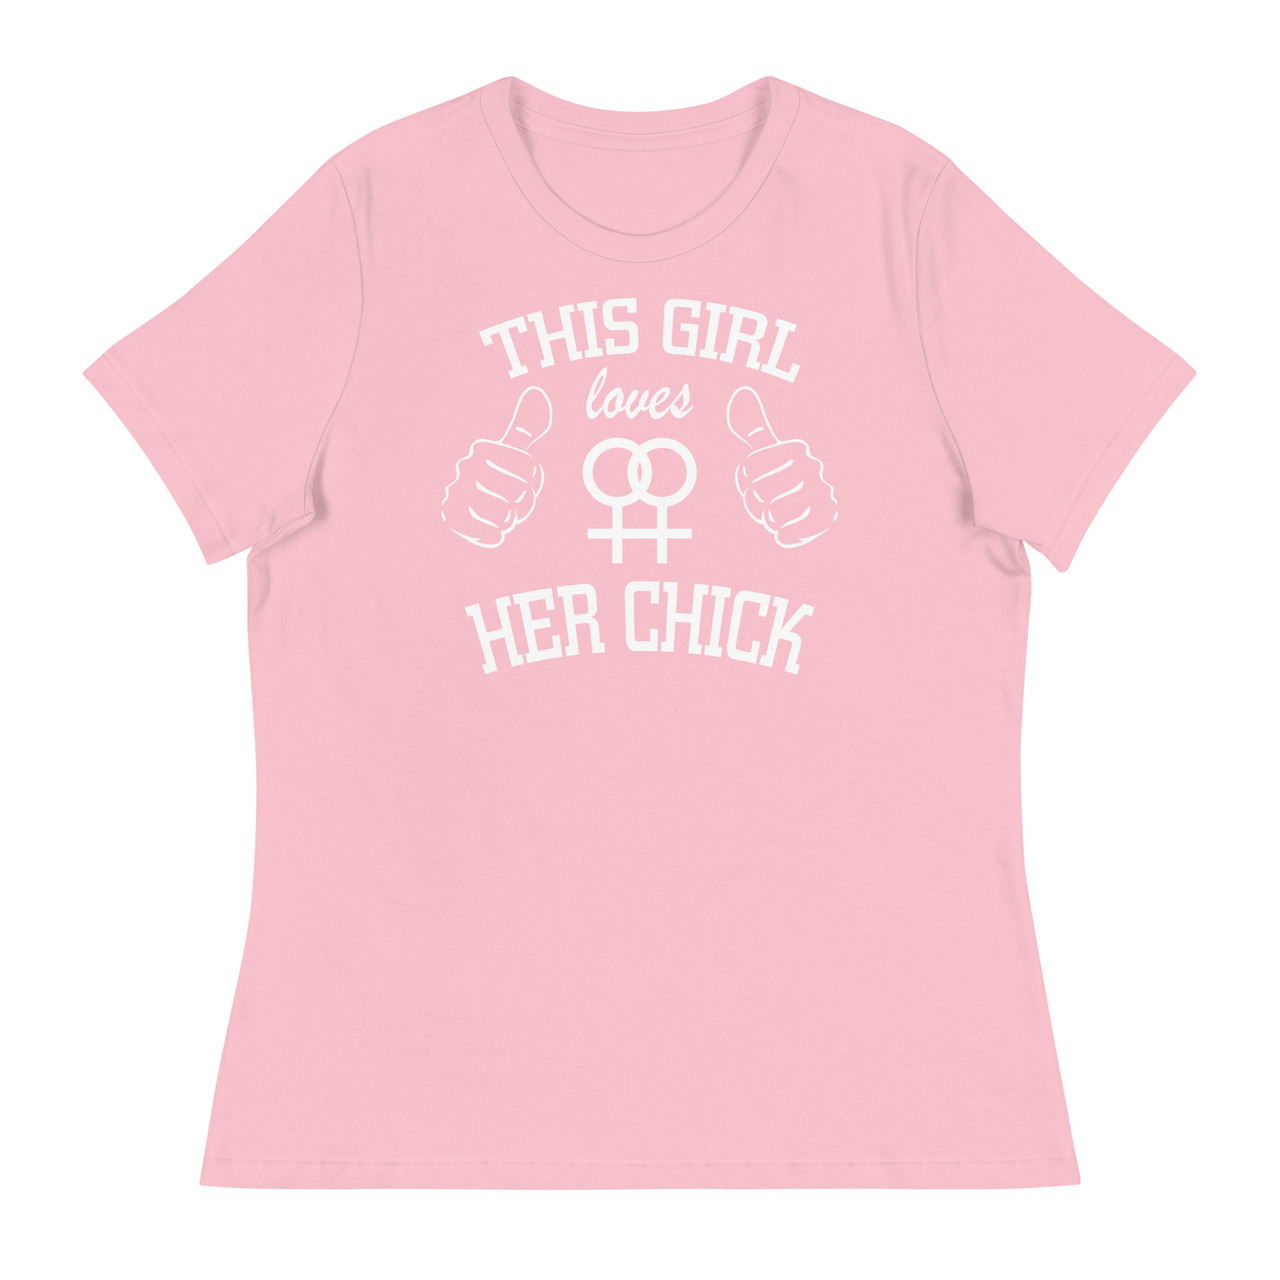 This Girl Loves Her Chick Women's Relaxed T-Shirt - Bella + Canvas 6400 